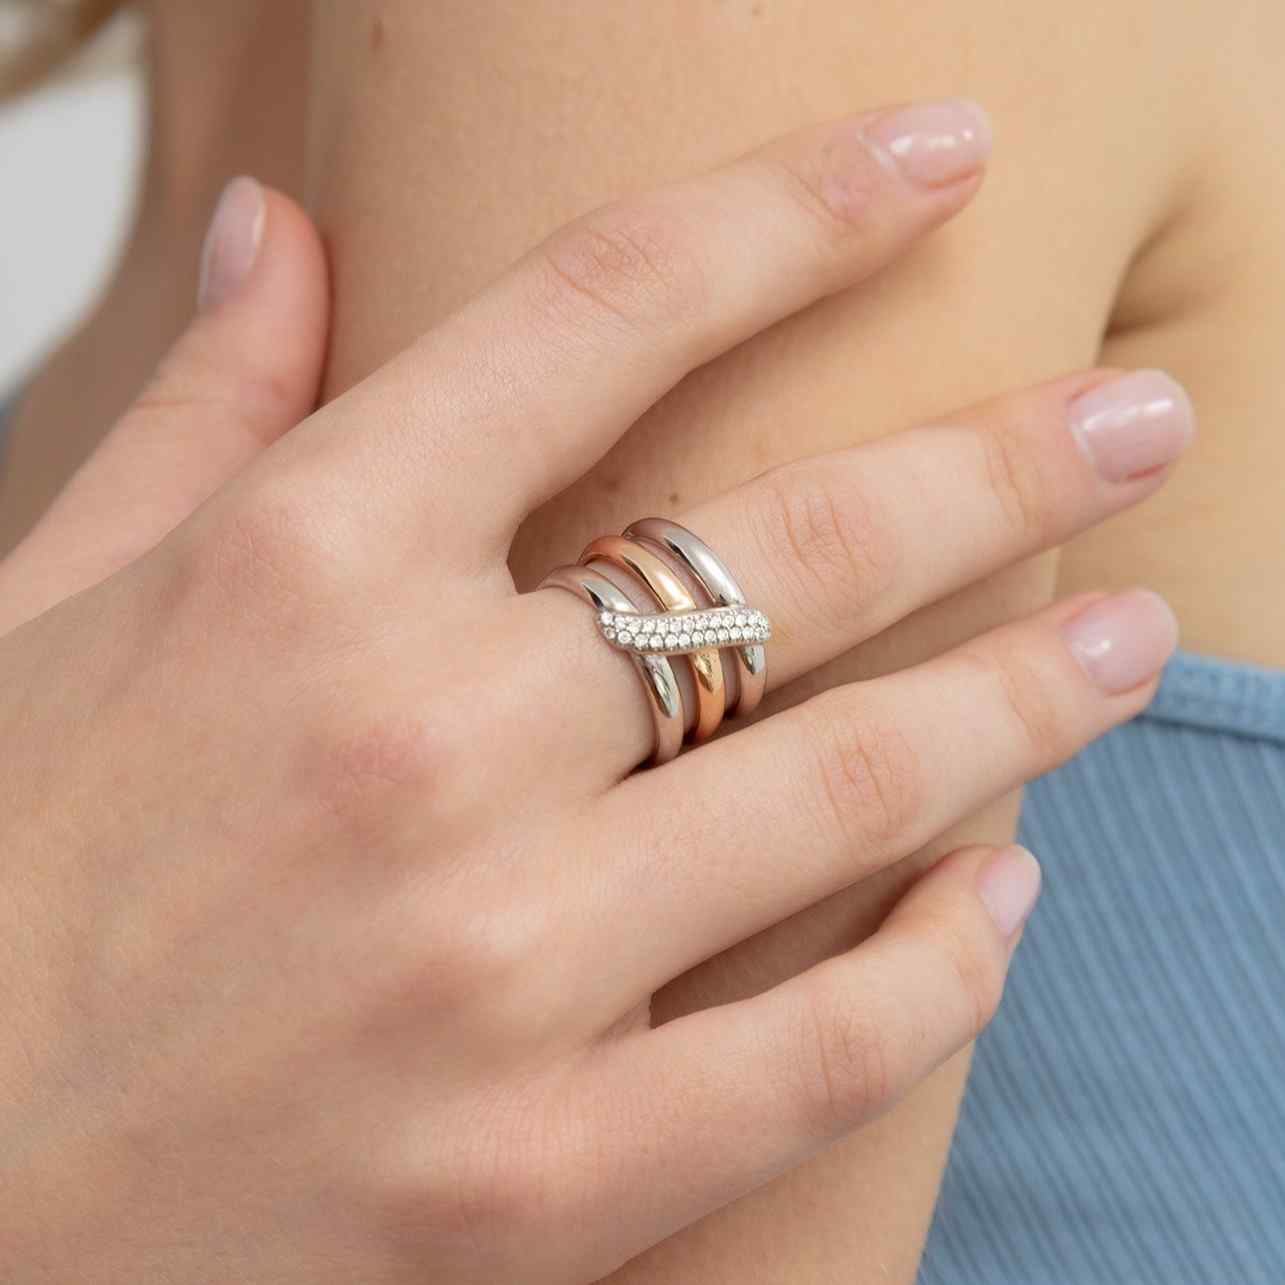 A model wears the Dalliance Sash Ring - made with recycled 18K White and Rose Gold - mixing cool and warm tones for the perfect statement ring. The sash of pavé diamonds are all D color, IF/VVS clarity.